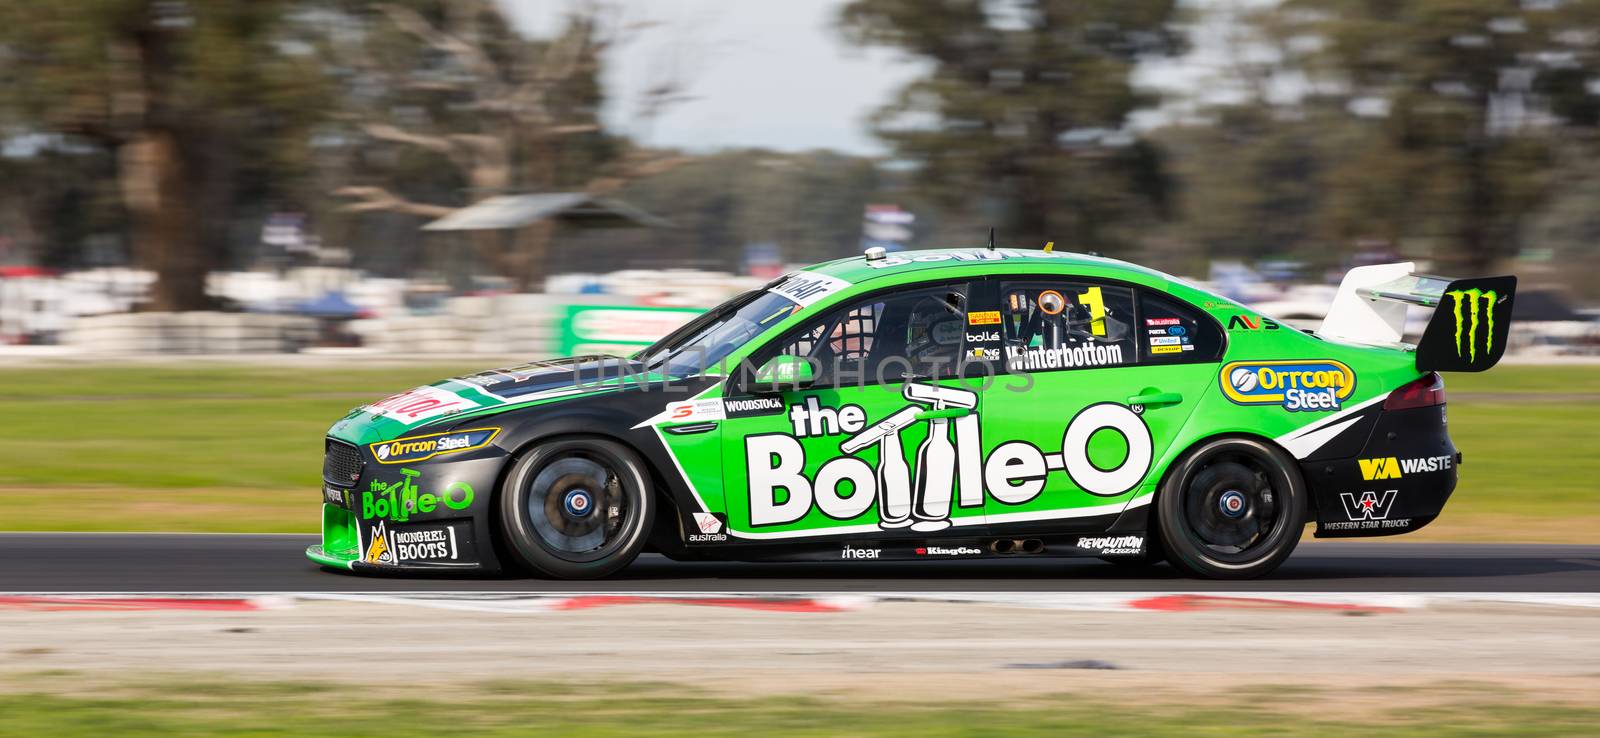 MELBOURNE, WINTON/AUSTRALIA, 22 MAY , 2016: Virgin Australia Supercars Championship  - Mark Winterbottom (The Bottle-O Racing Team) during Race 10 at Winton.